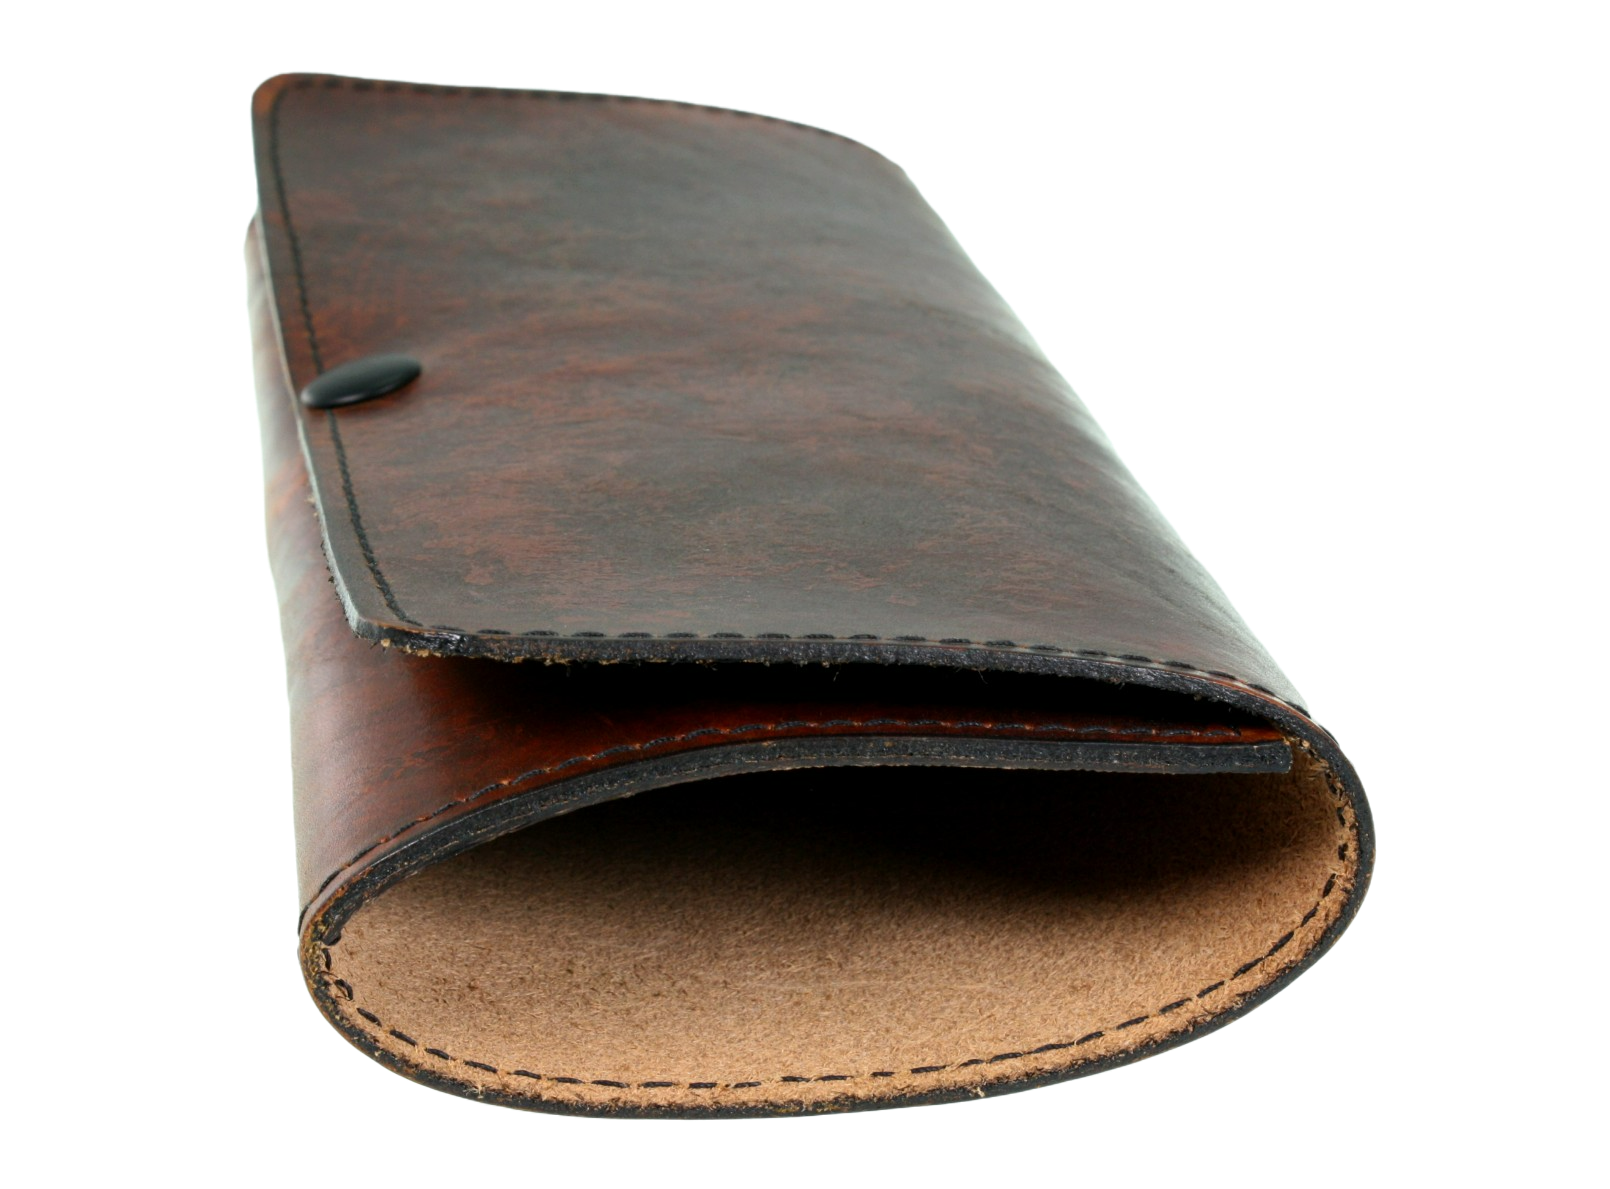 Side view showing stitching, wallet closed